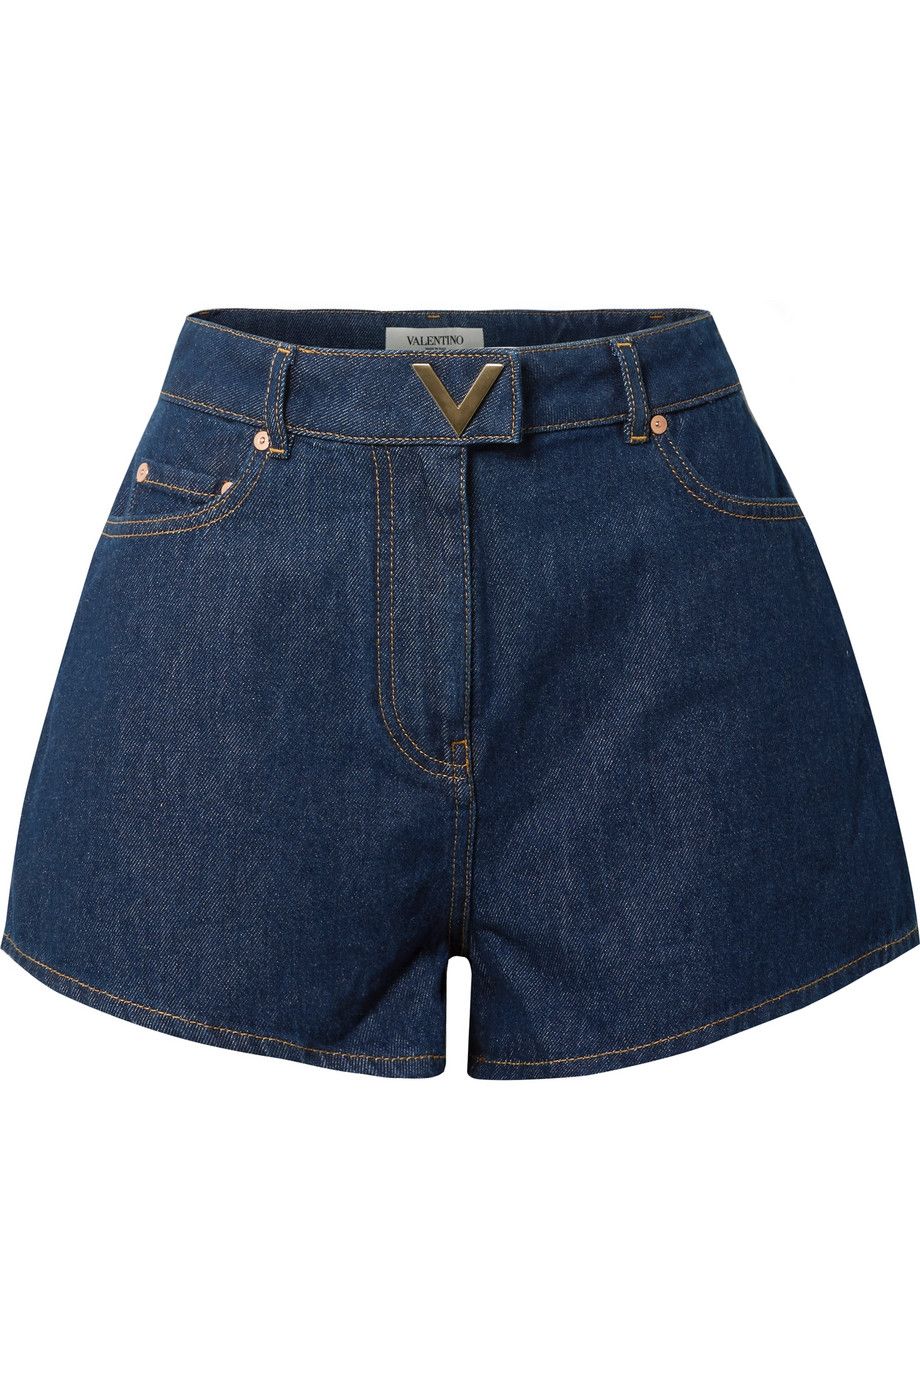 Y/Project Releases Denim Brief-Style Short Shorts & the Internet